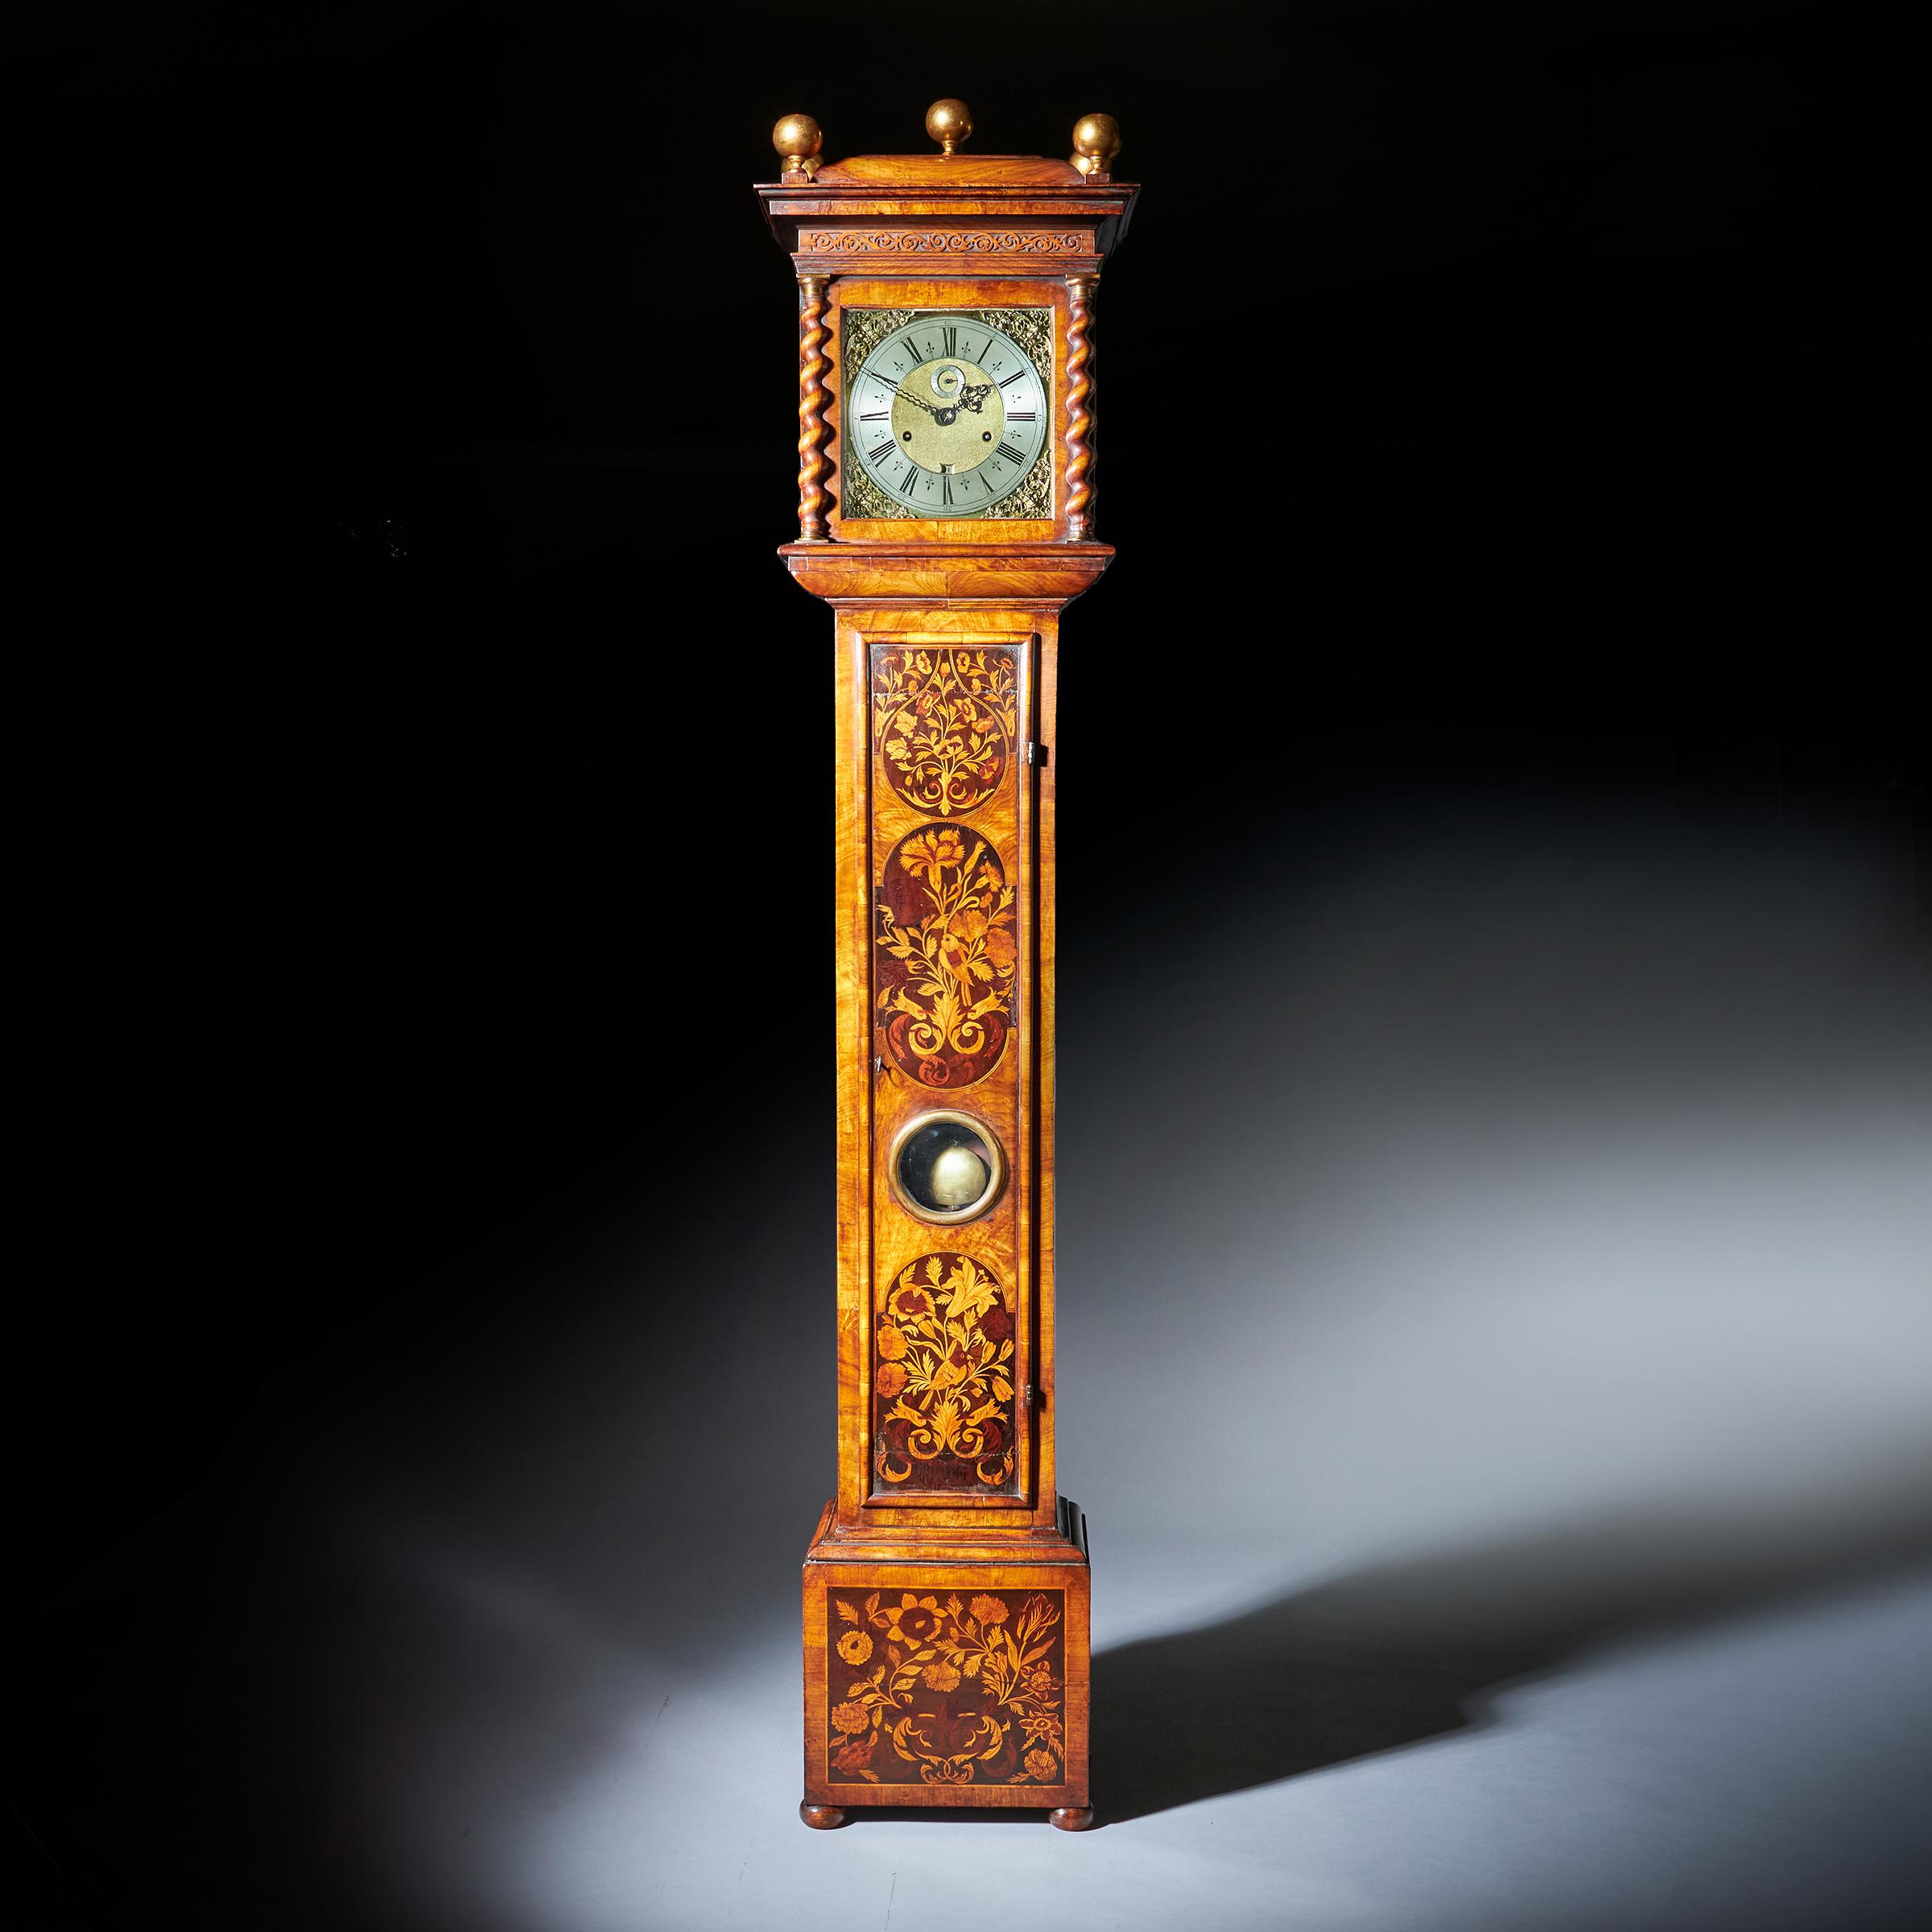 A superb Charles II month duration floral marquetry longcase clock by the well-known maker John Wise, c. 1680-85. Measure: 10